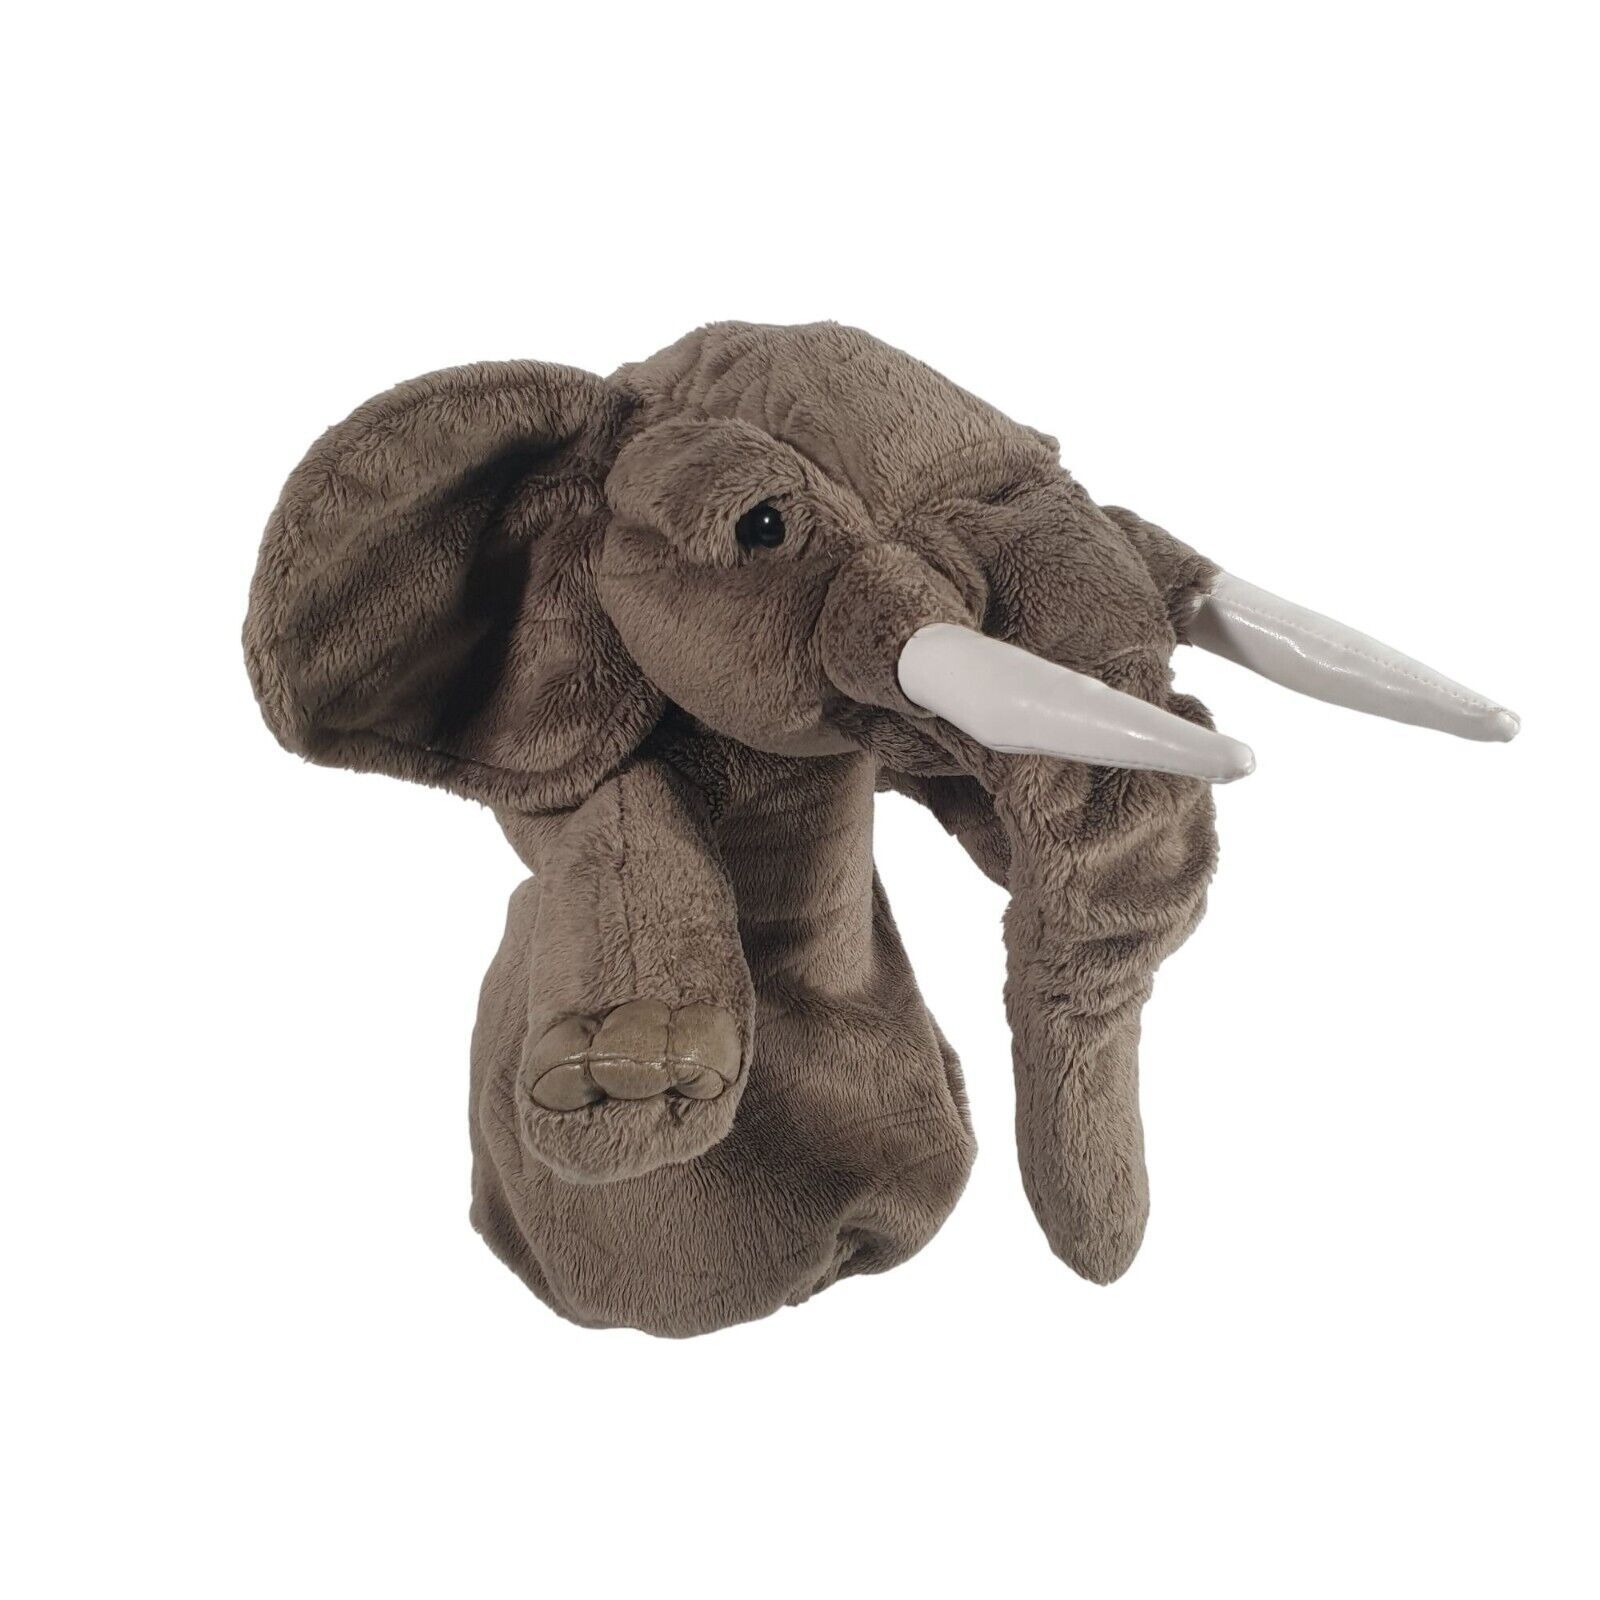 Folkmanis Elephant Stage Puppet 2010 Theater Church School Storytime Zoo Animal - $26.18